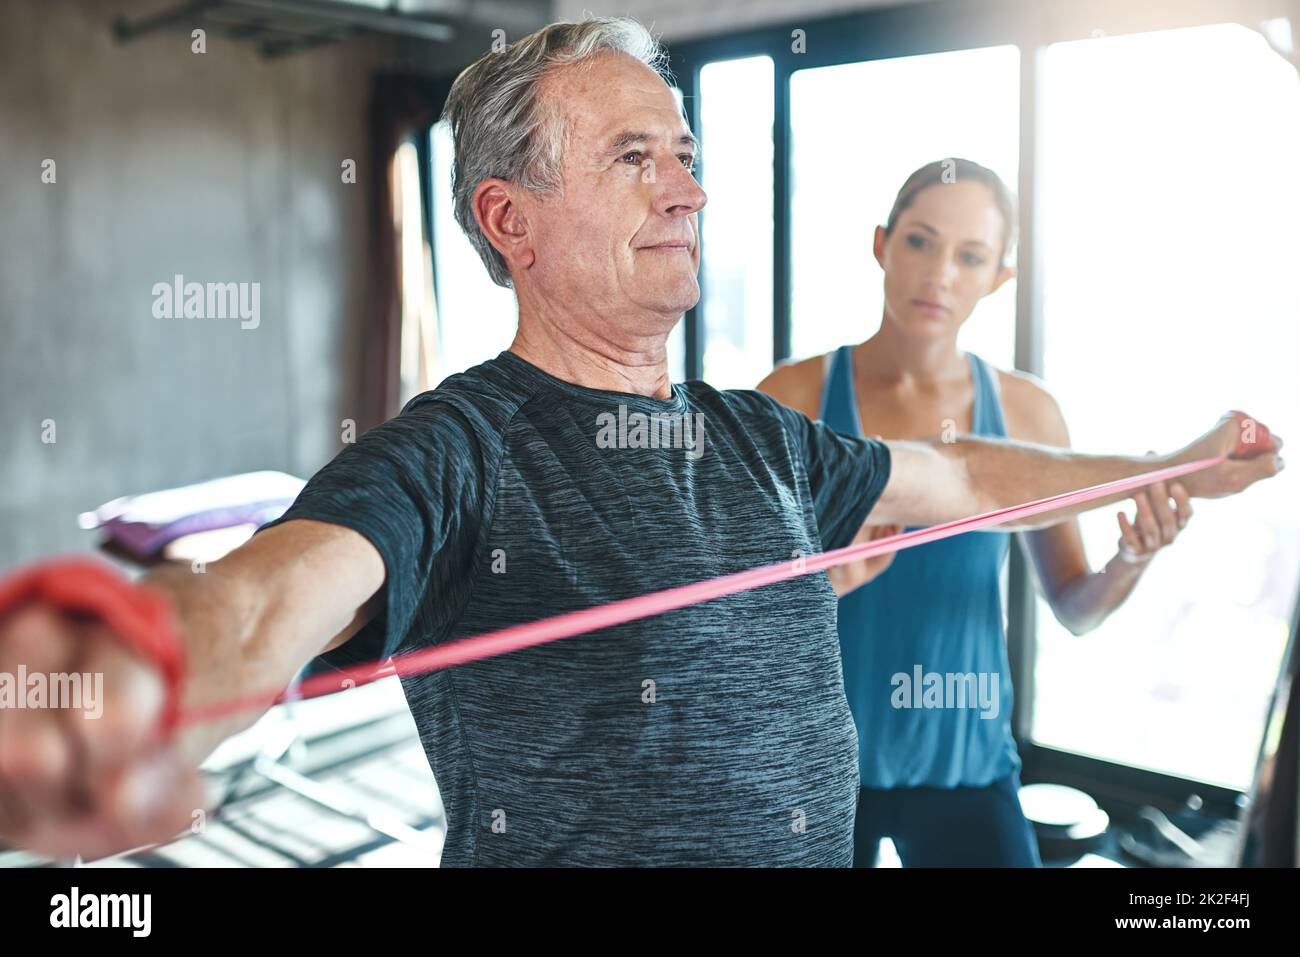 Maintaining healthy muscle no matter the age. Shot of a senior man using resistance bands with the help of a physical therapist. Stock Photo